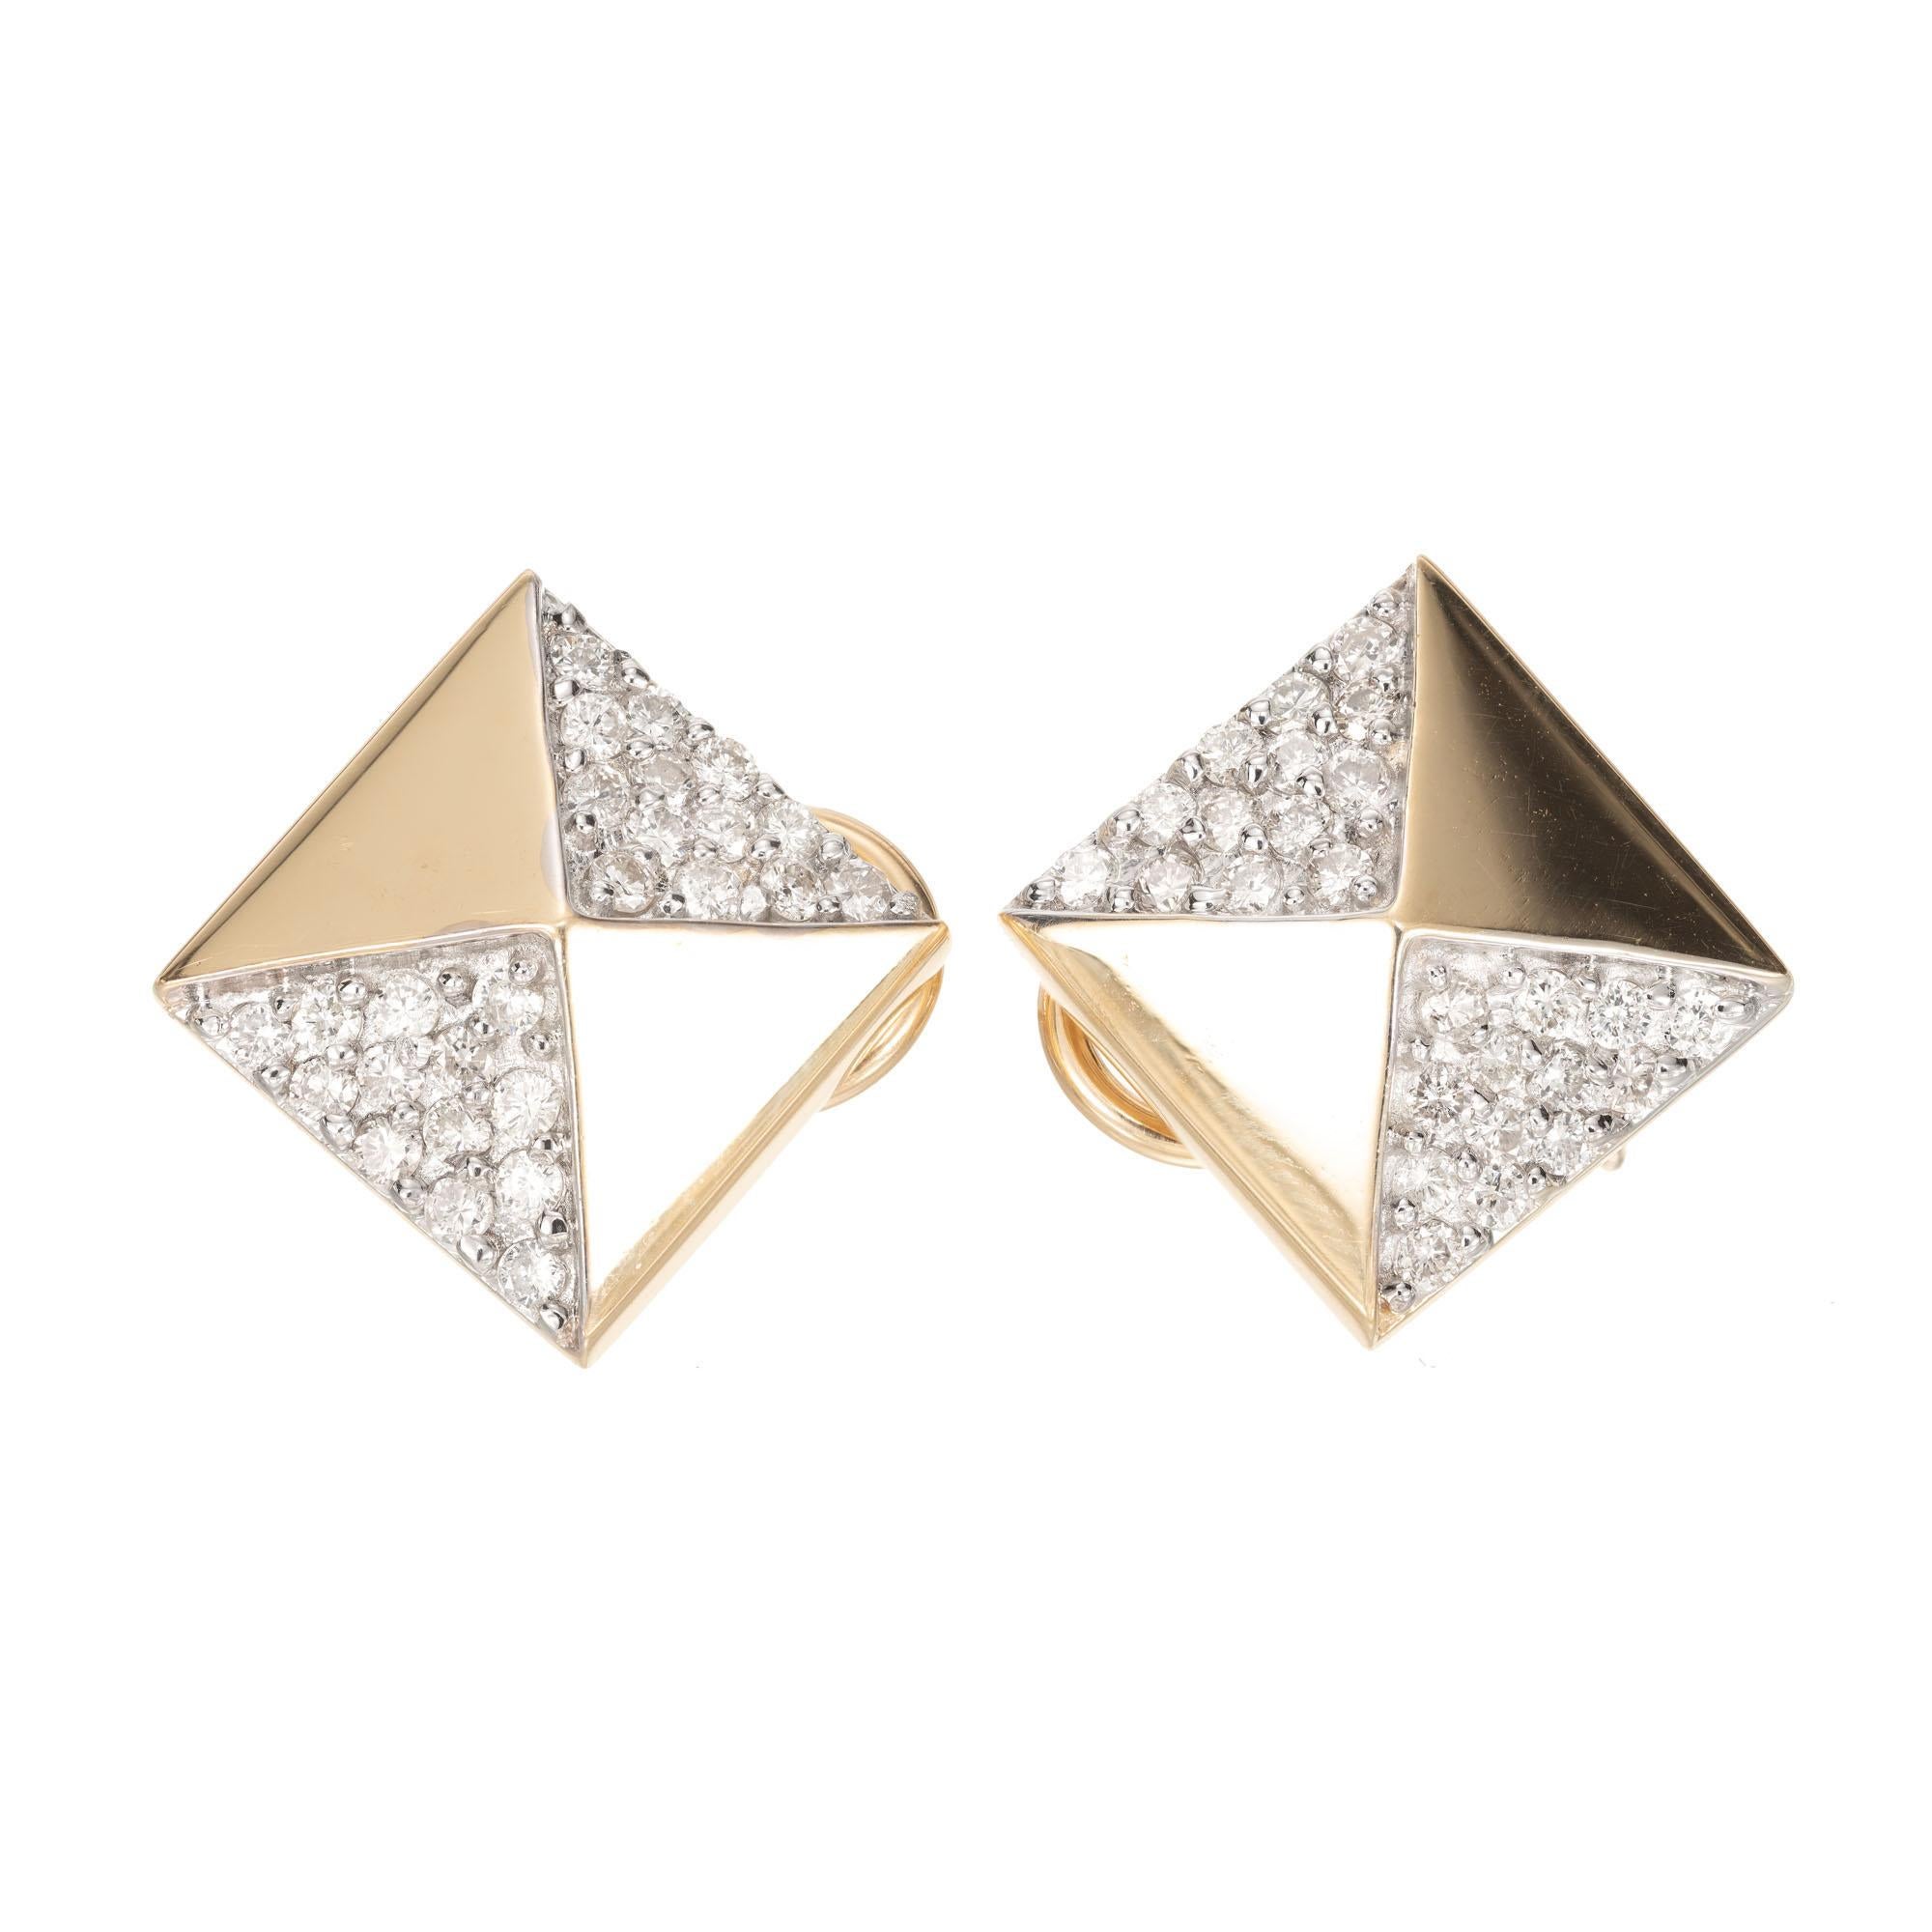 Pyramid design 14k yellow gold clip post earrings with 52 round full cut Pavé set diamonds.

52 round full cut Diamonds, approx. total weight .65cts, H, SI1
14k yellow gold
Tested: 14k
Stamped: 585
Hallmark: *
Top to bottom: 18.85mm or .74